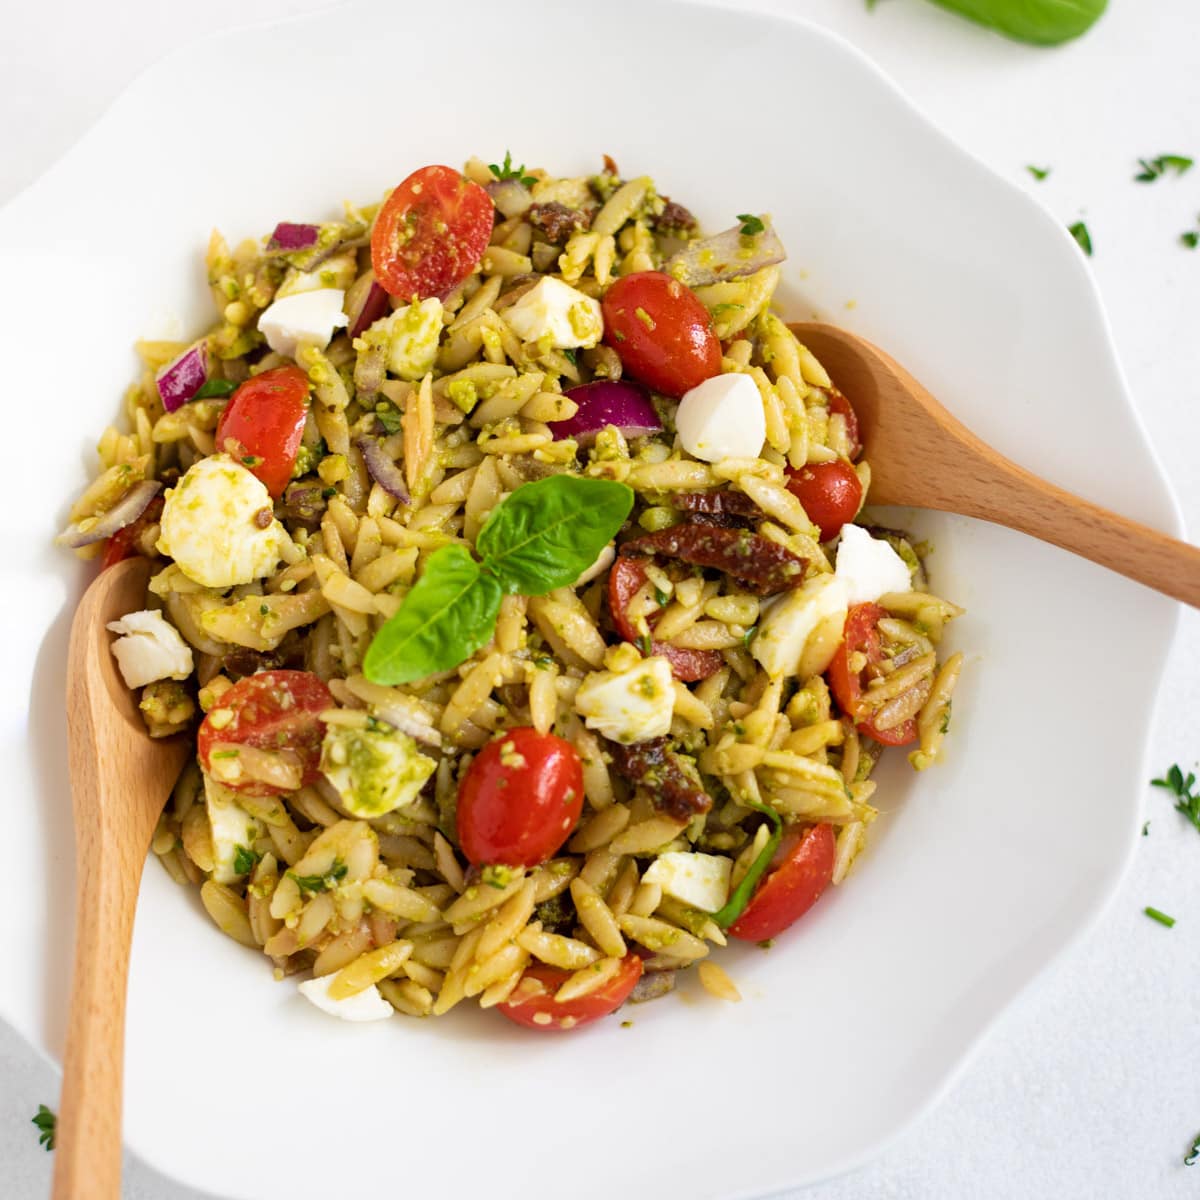 Pesto orzo pasta salad with tomatoes and mozzarella garnished with basil leaves